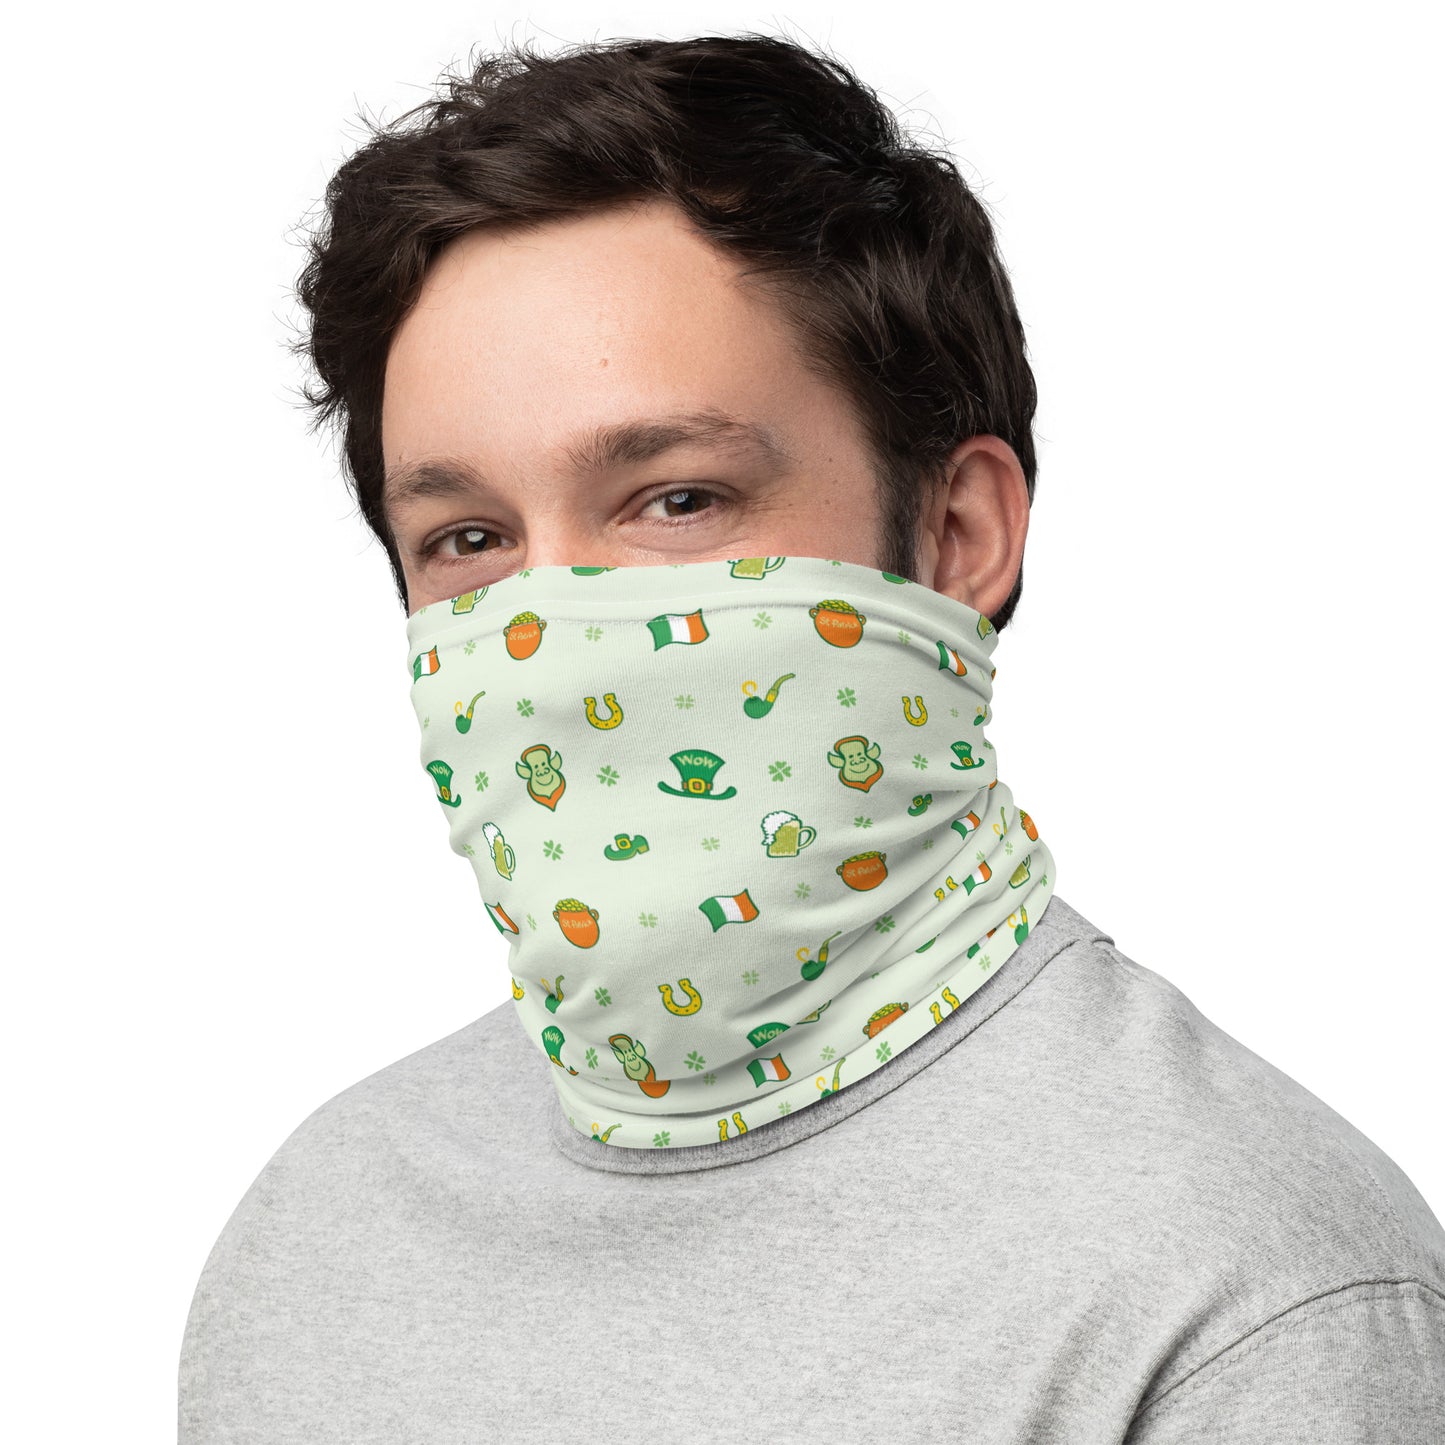 Smiling man wearing Neck Gaiter All-over printed with Celebrate Saint Patrick's Day in style pattern design